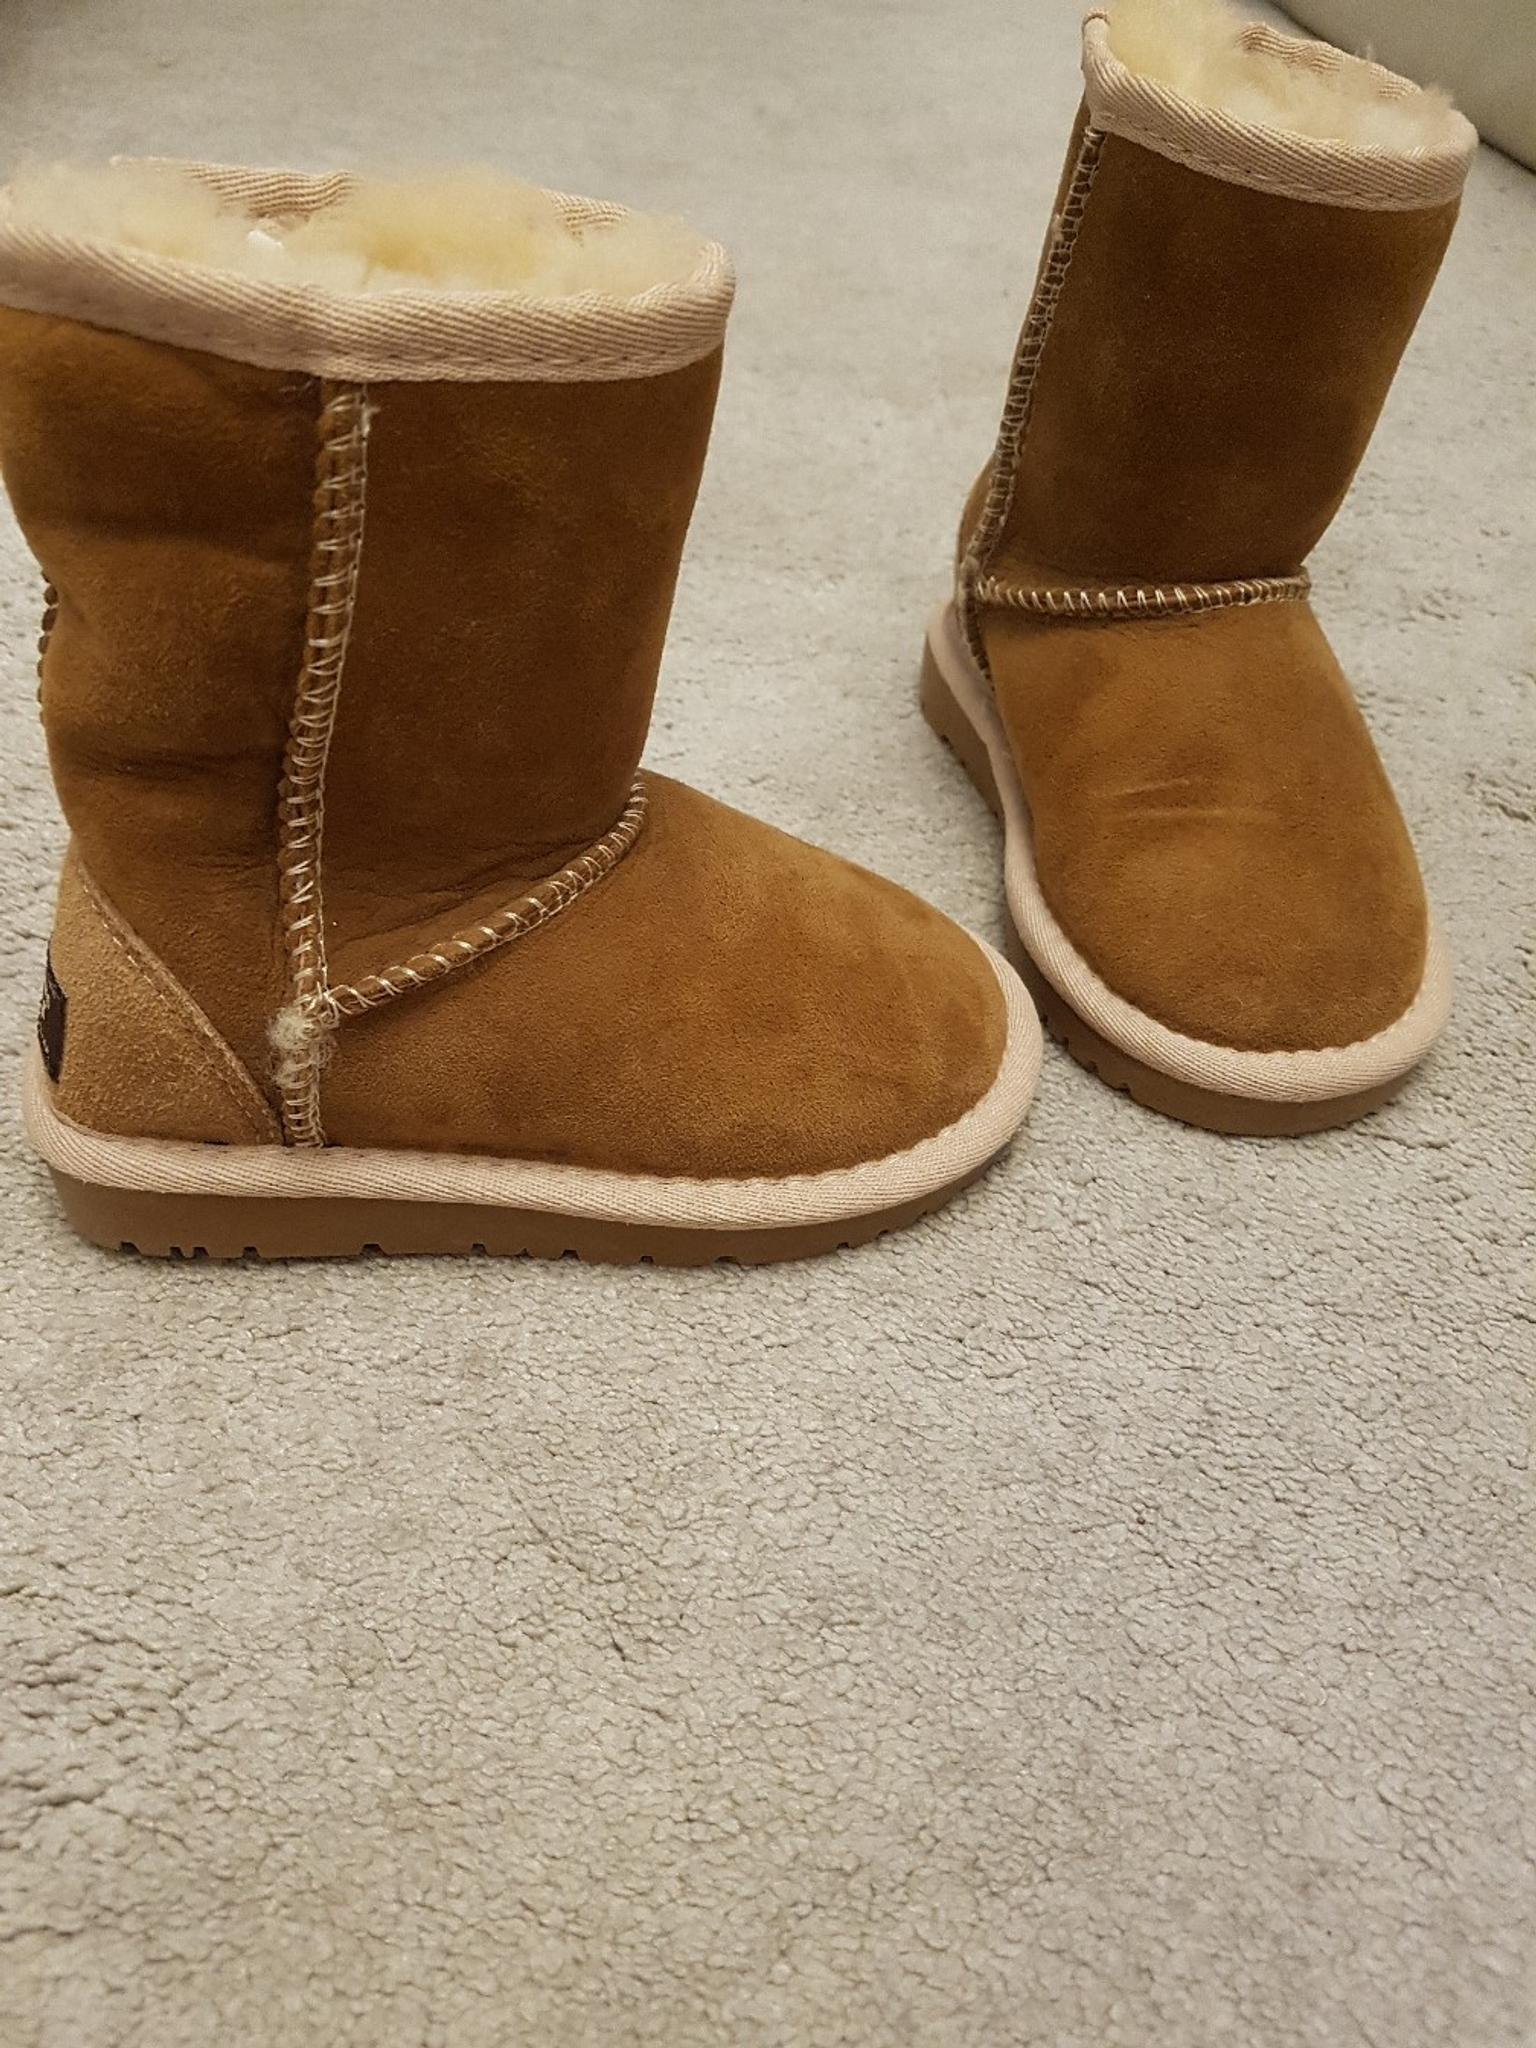 infant uggs size 7